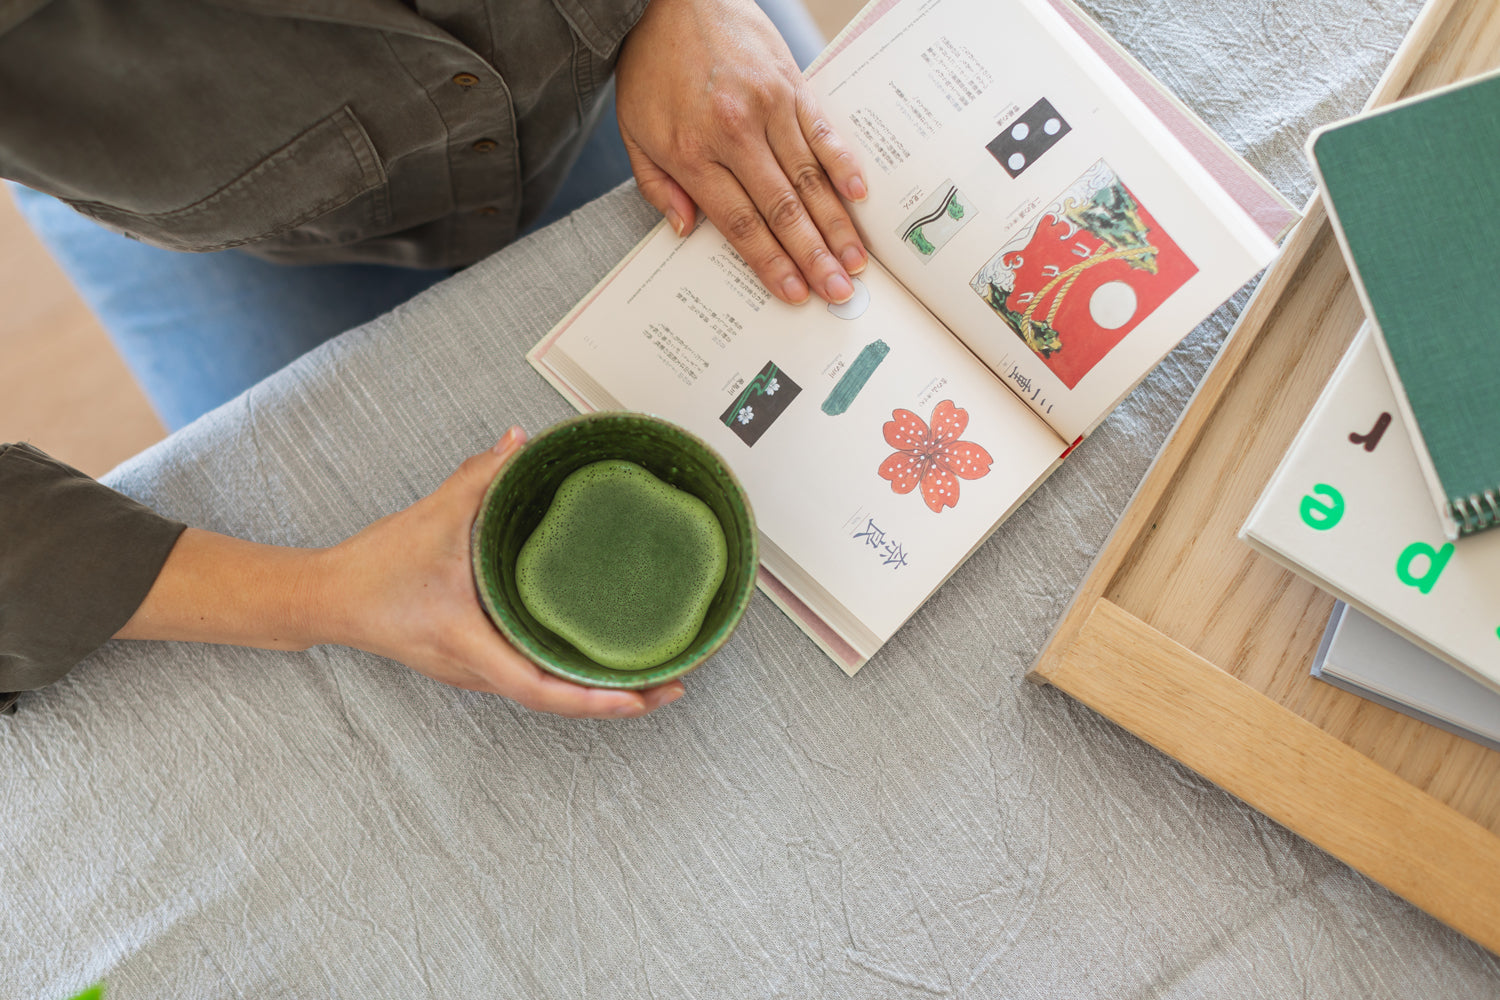 Bird’s eye view of a person enjoying a bright green cup of matcha and a colorful book.